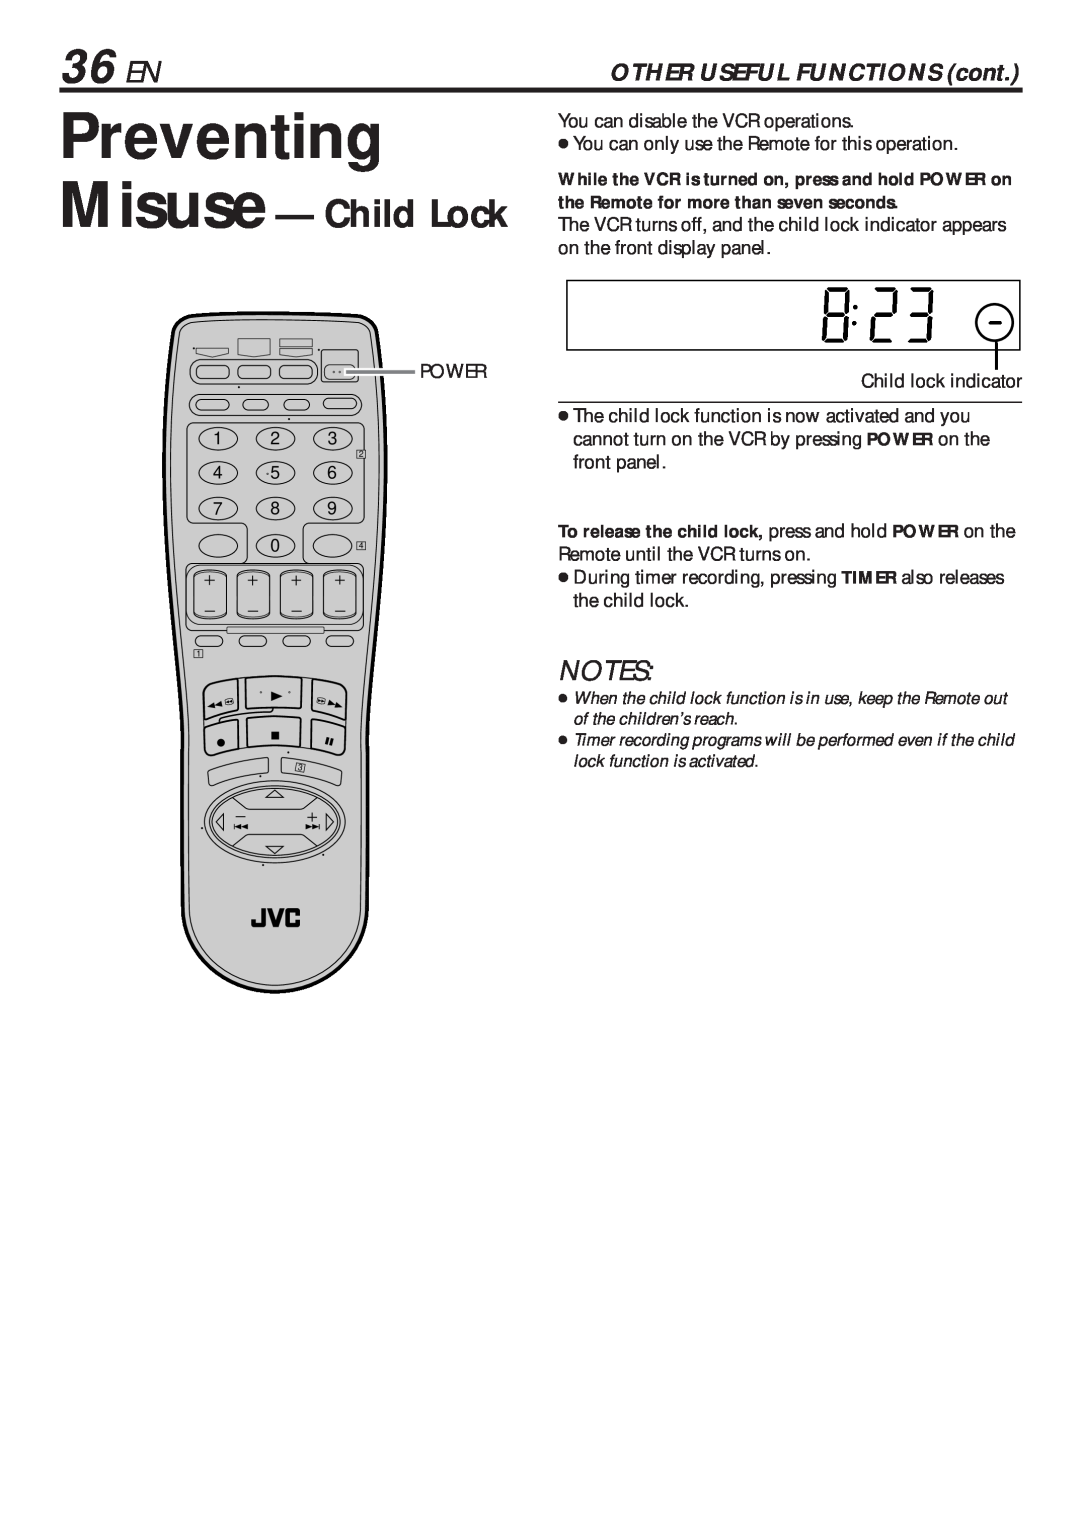 JVC HR-VP682U manual Preventing, 36 EN, Misuse- Child Lock, OTHER USEFUL FUNCTIONS cont 